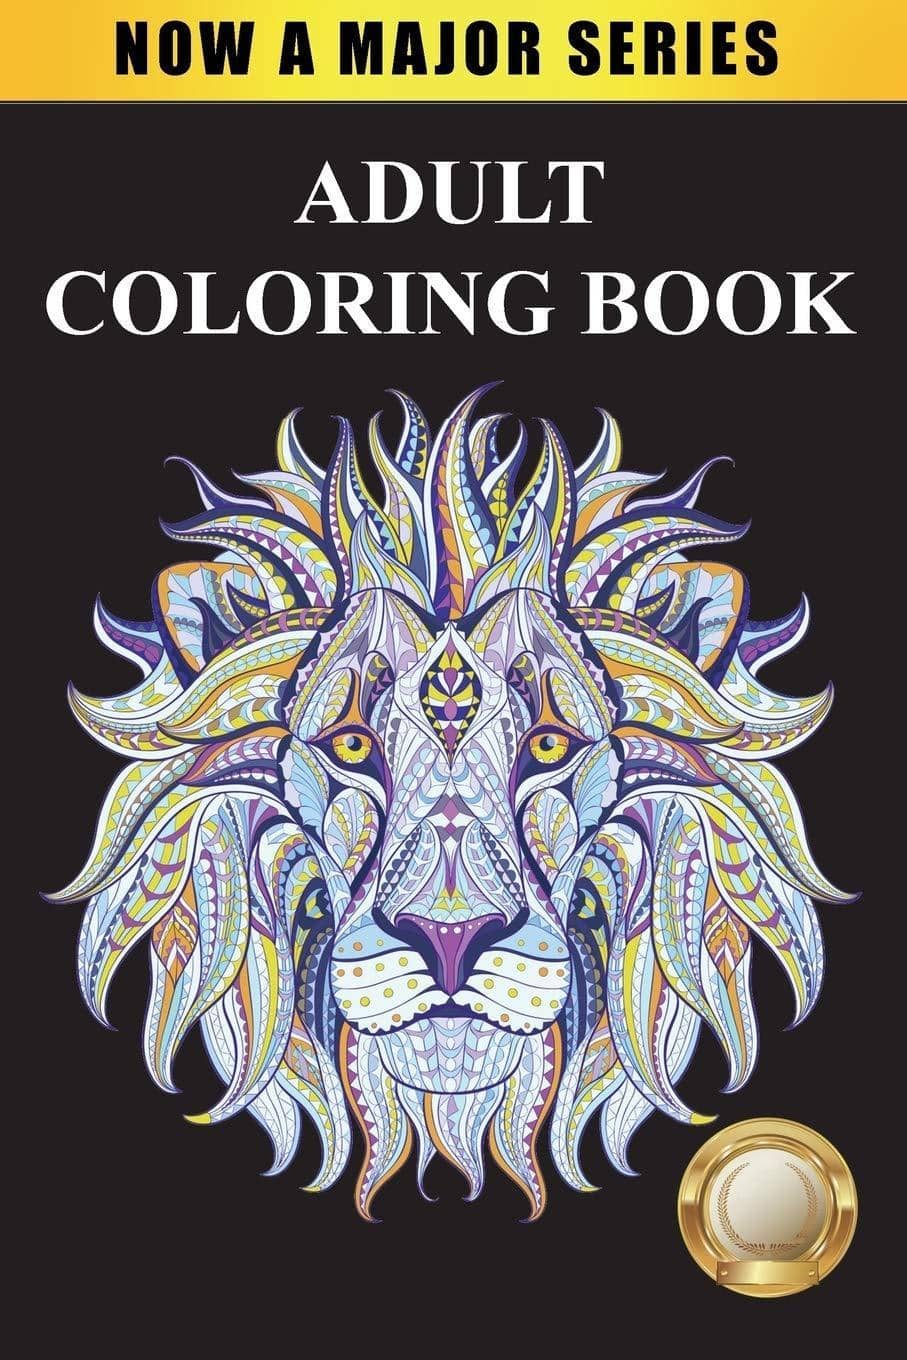 Adult Coloring Book: Largest Collection of Stress Relieving Patt - SureShot Books Publishing LLC